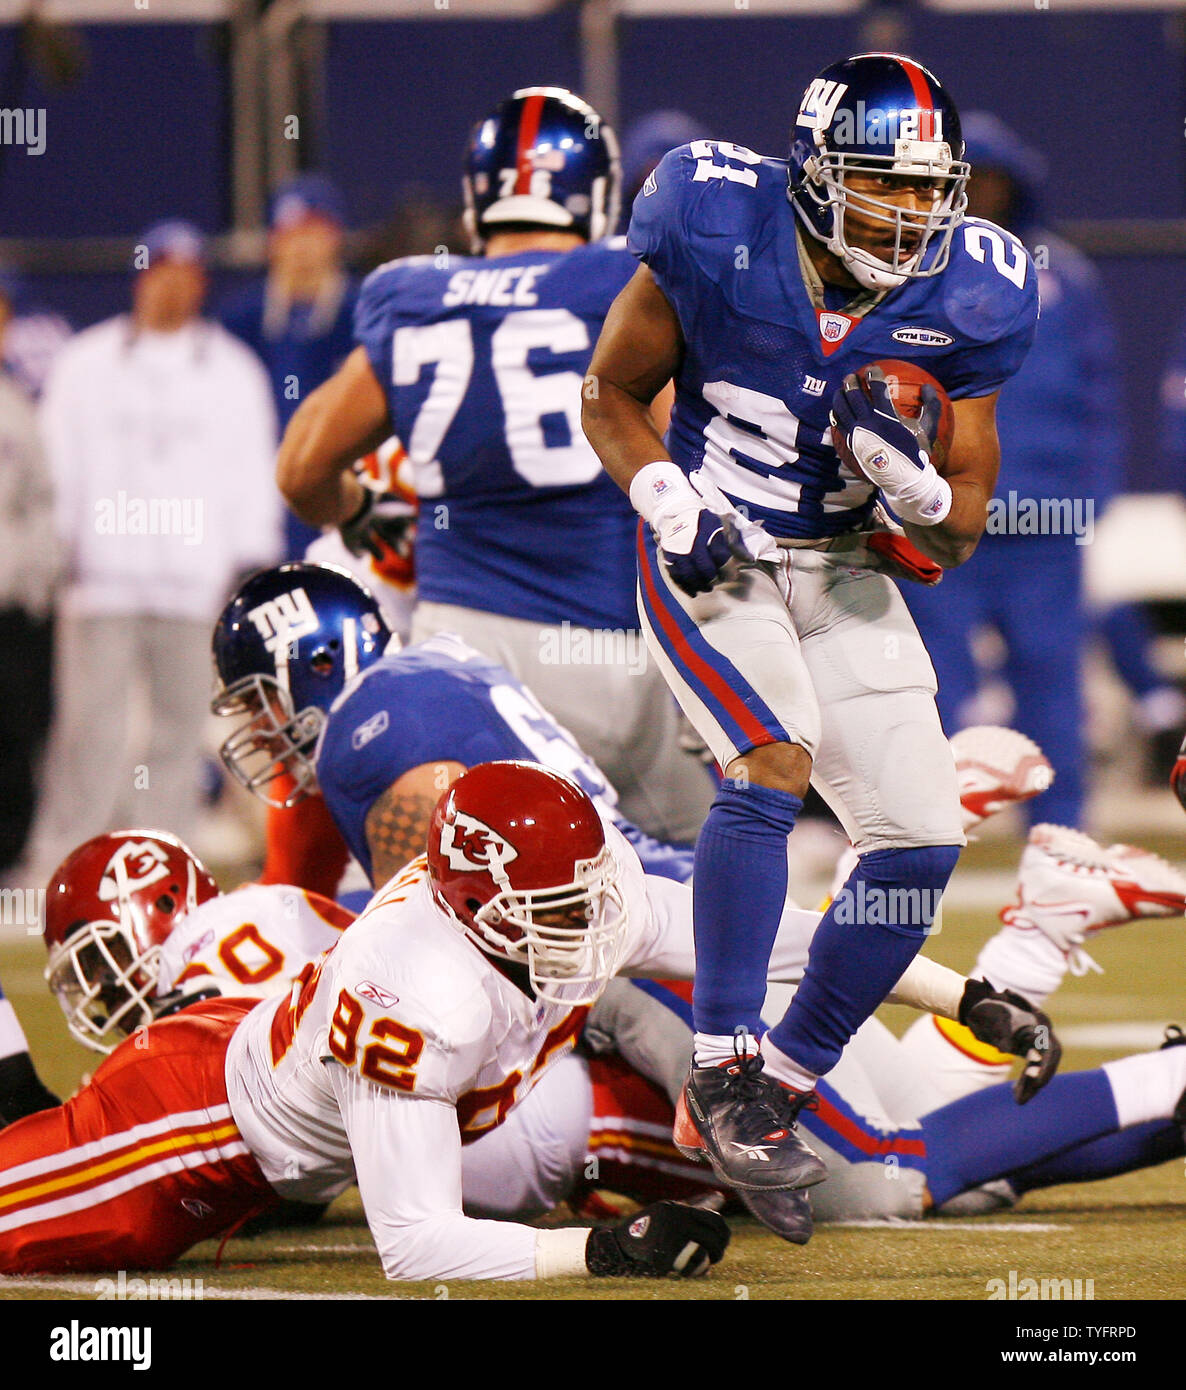 New York Giants runningback Tiki Barber leaps over defenders in week 15 at  Giants Stadium in East Rutherford, New Jersey on December 17, 2005. The New  York Giants defeated the Kansas City